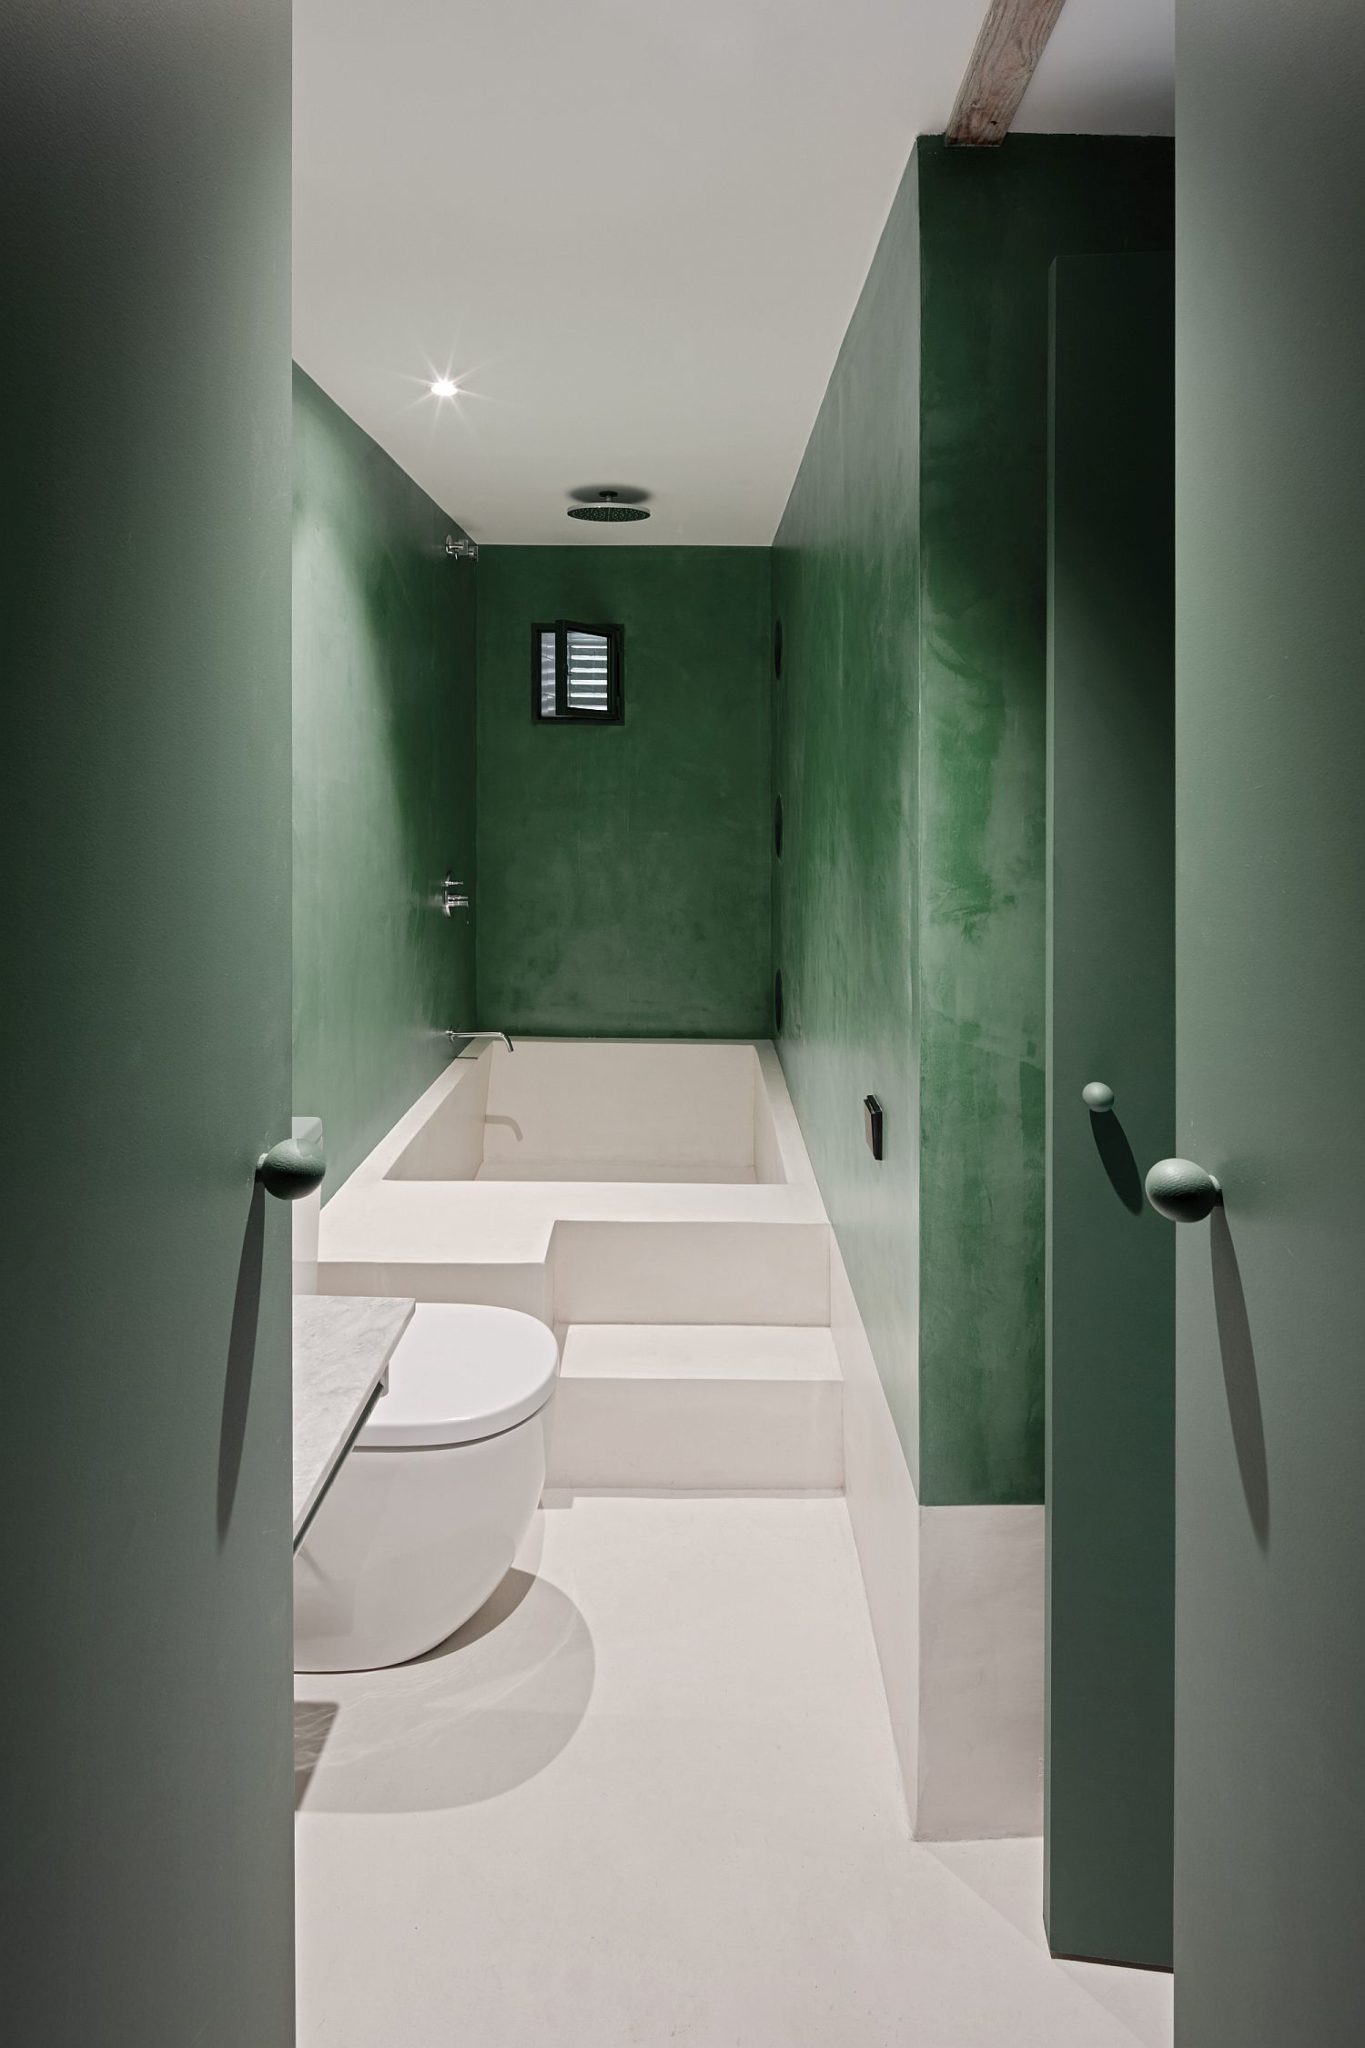 Greeen adds vibrance to the bathroom in white